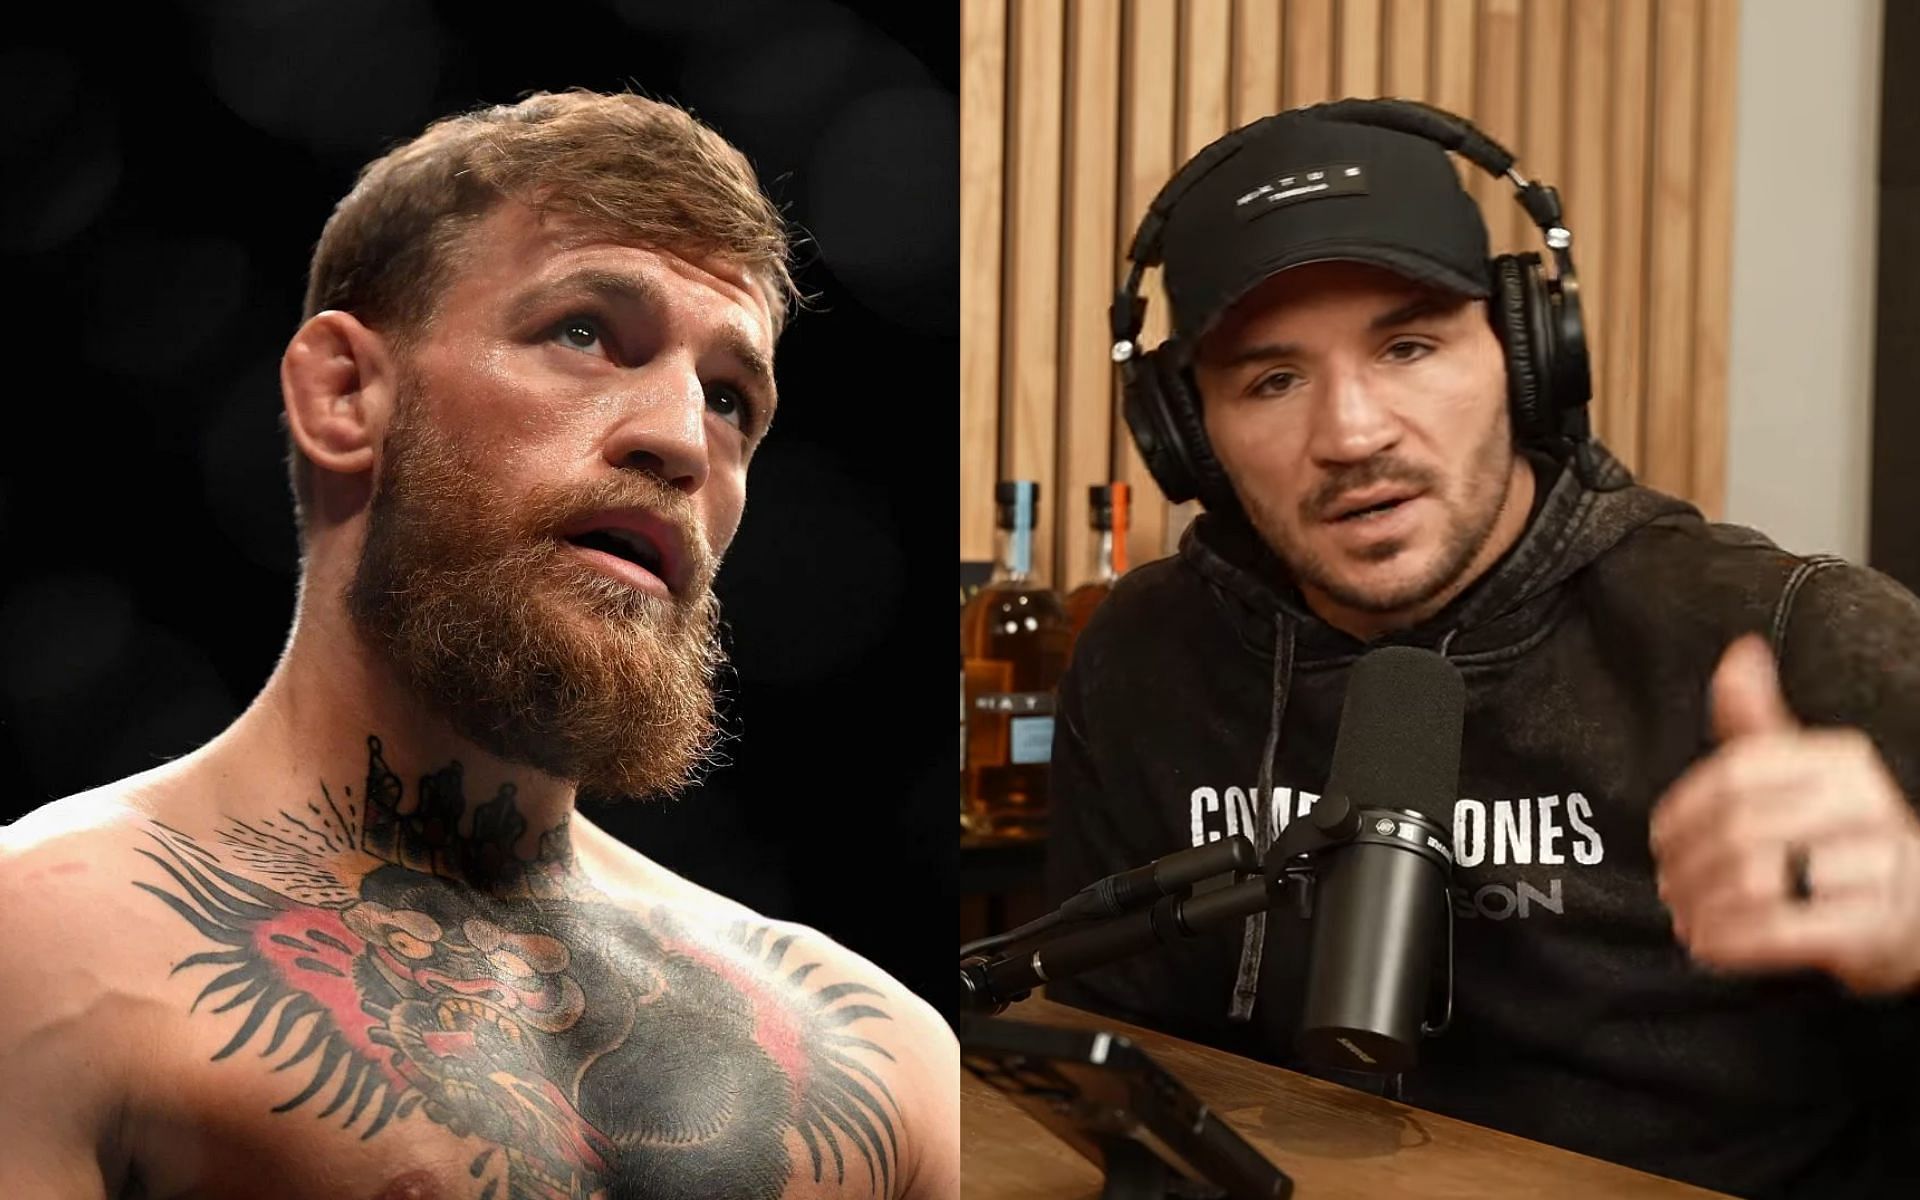 Michael Chandler (right) sheds light on canceled press conference with Conor McGregor (left) [Images courtesy: Getty Images and @michaelchandler on YouTube]